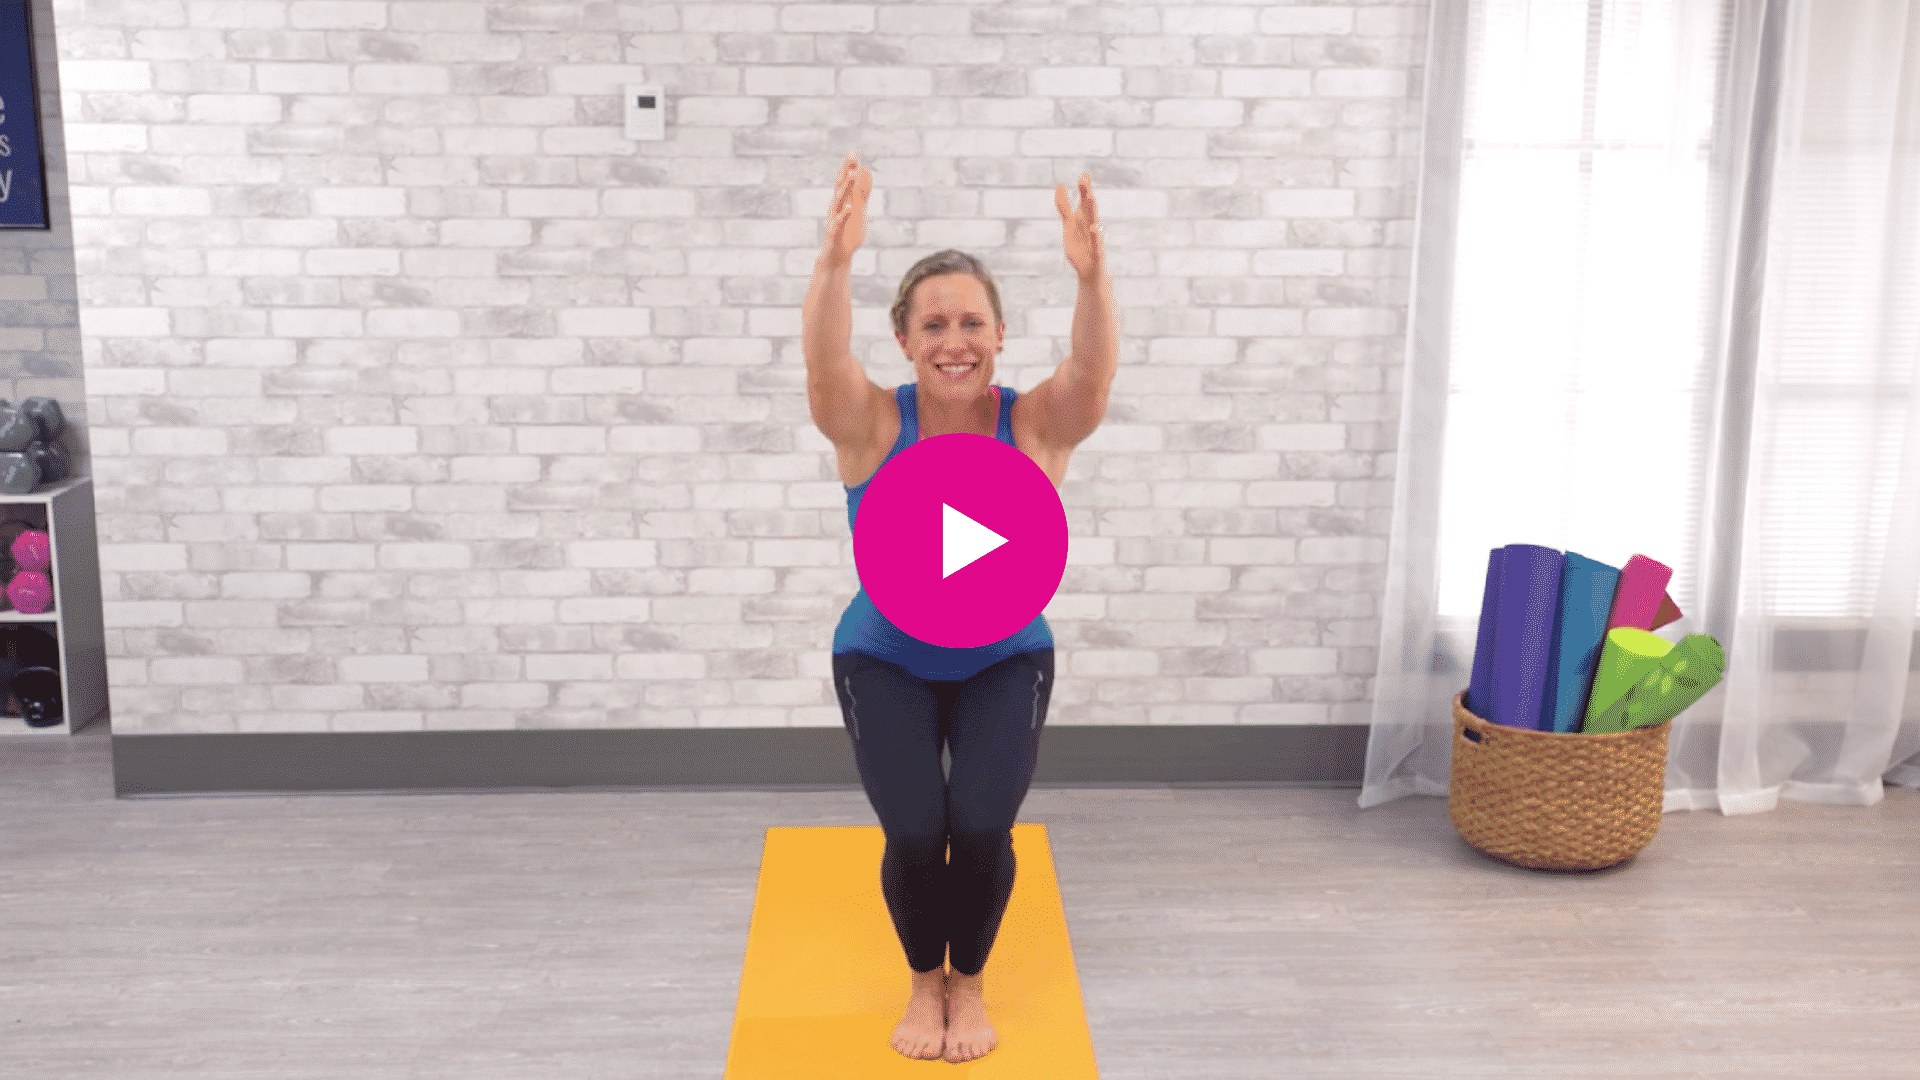 Jodi performing a 10 minute pilates yoga fusion workout video